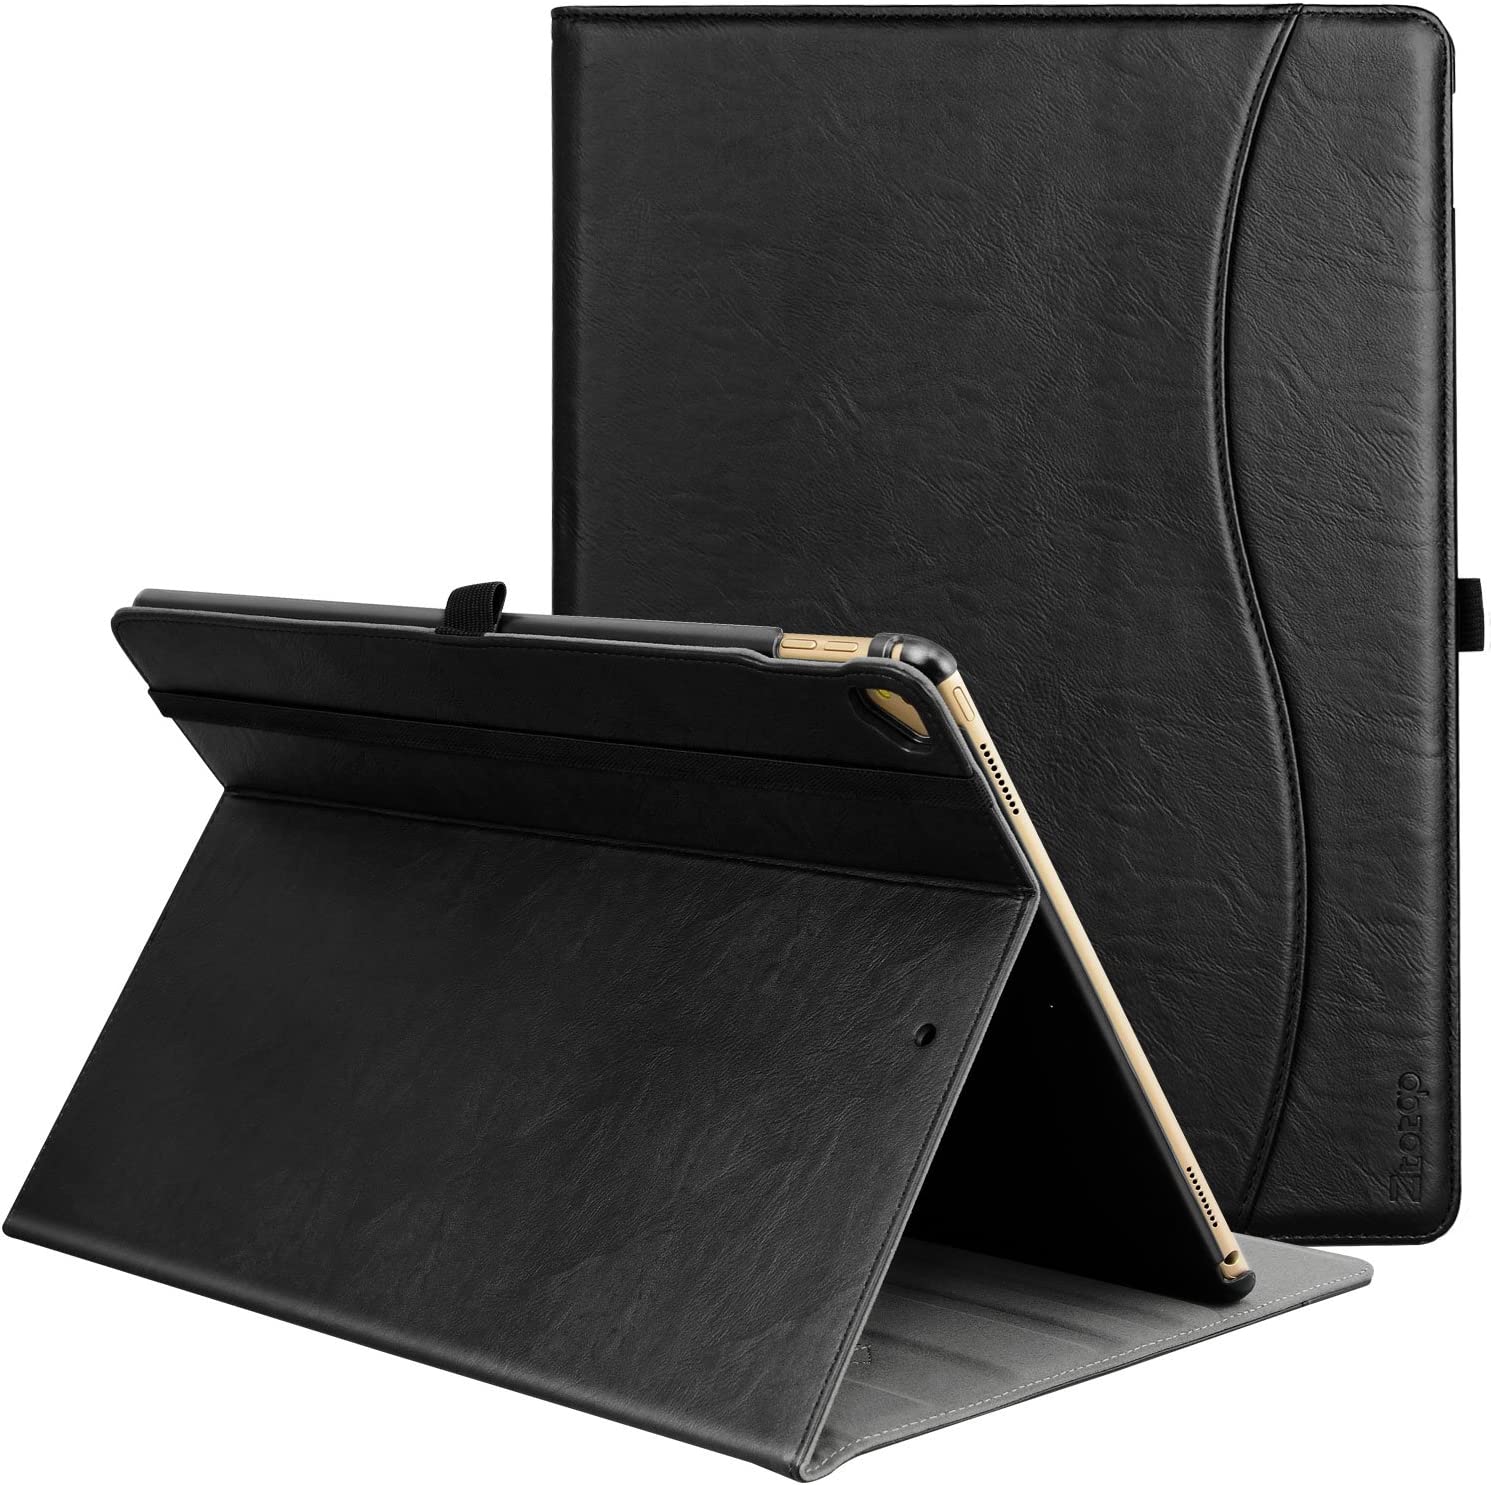 ZtotopCase for iPad Pro 12.9 Inch 2017/2015 (Old Model,1st & 2nd Gen), Premium Leather Business Folding Stand Folio Cover with Auto Wake/Sleep and Document Card Slot, Multiple Viewing Angles